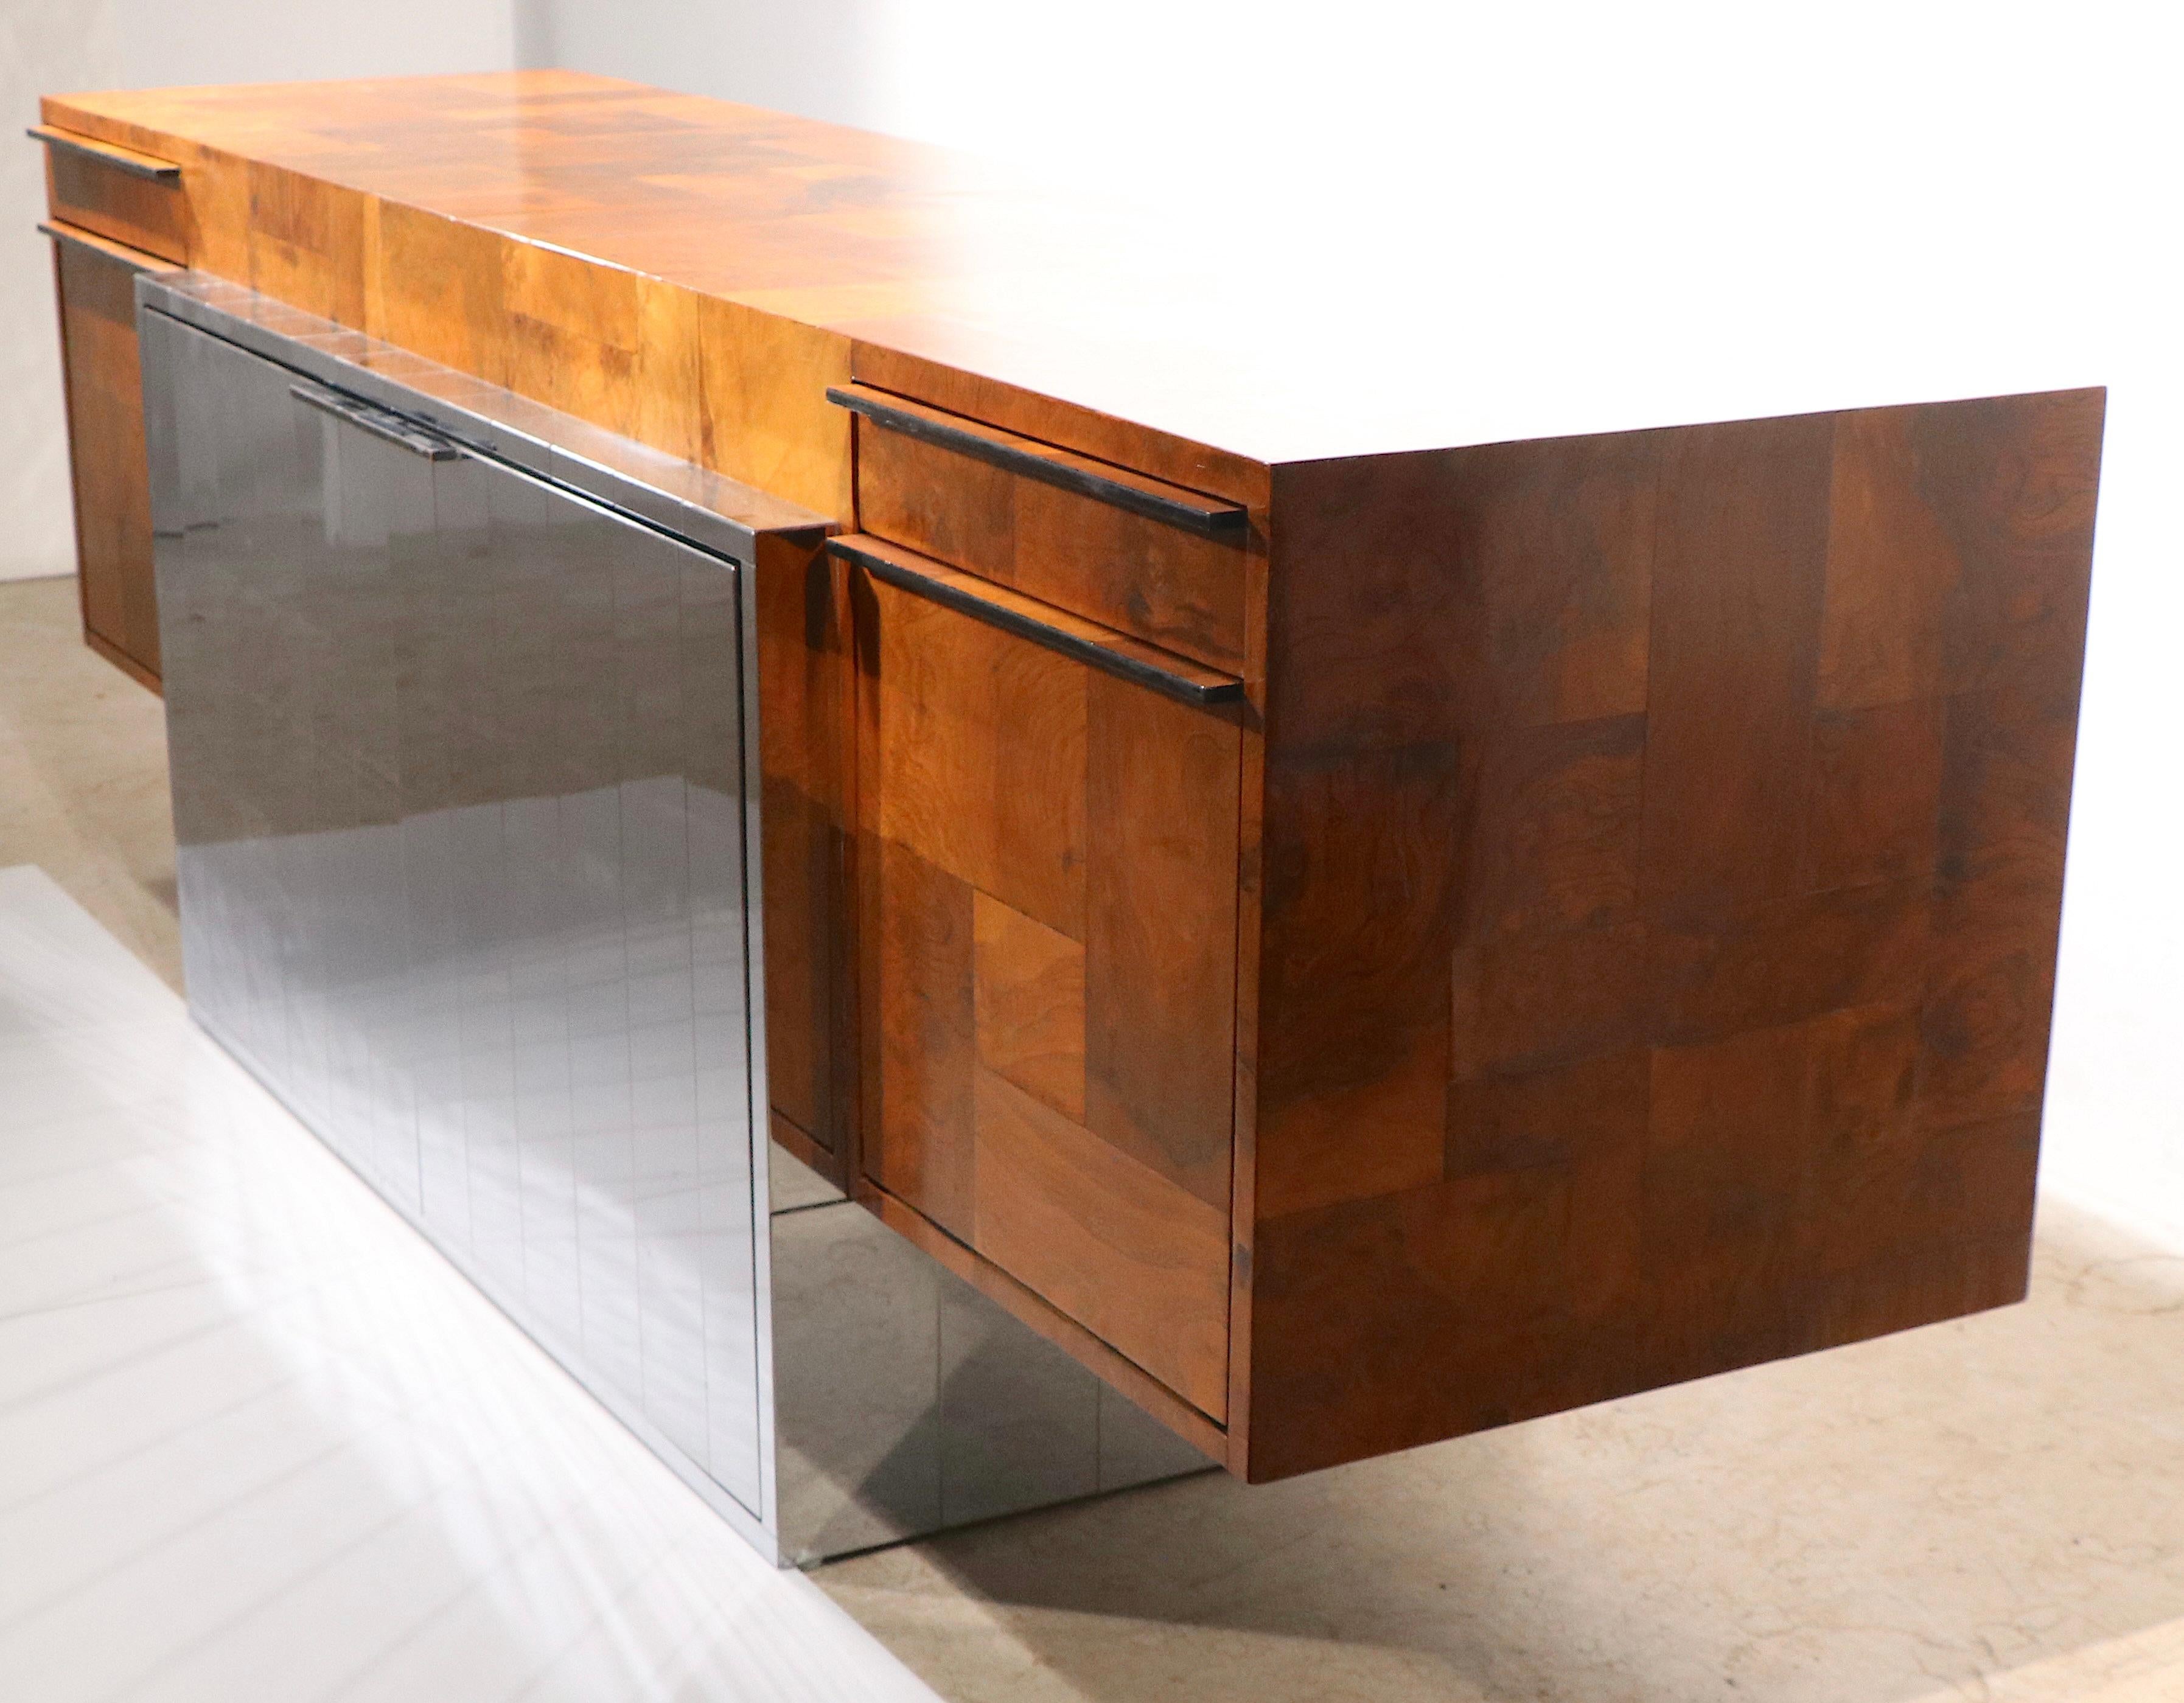 Spectacular Post Modern, Brutalist school credenza, designed by Paul Evans for Directional c. 1970's. The sideboard features a large rectangular cabinet with patchwork burl veneer, which is supported by a bright chrome patchwork center case. The